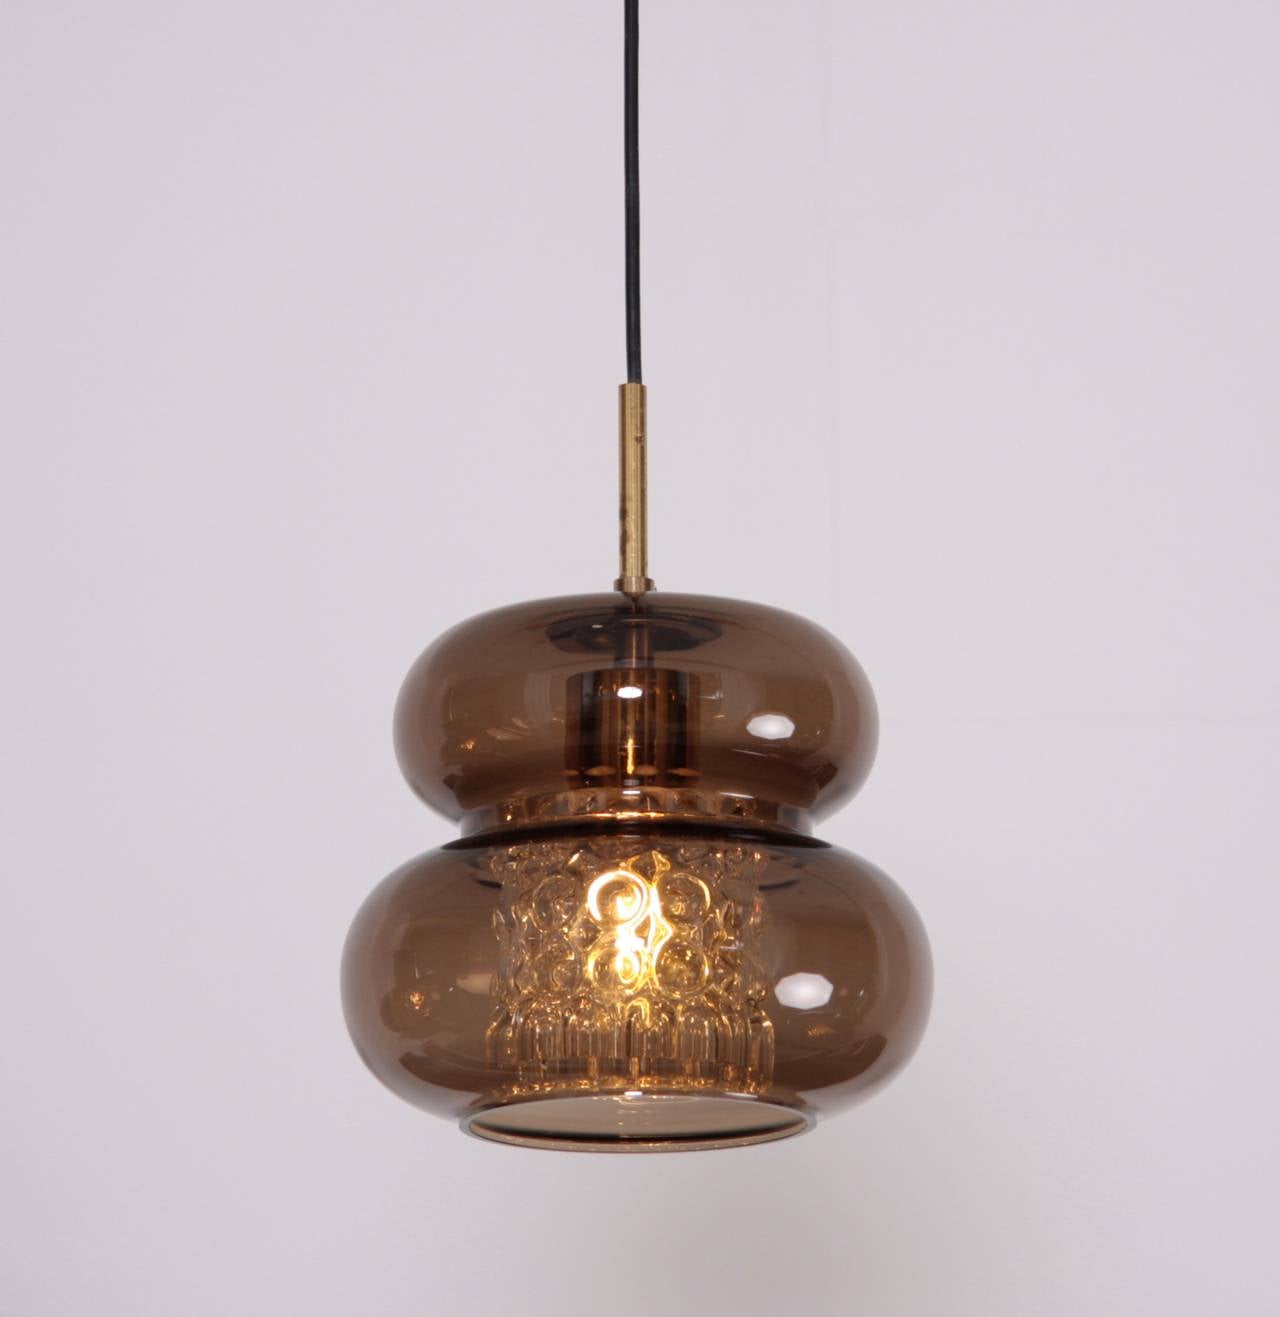 Pendant by Carl Fagerlund for Orrefors with pressed glass diffuser in a brown glass shade.

